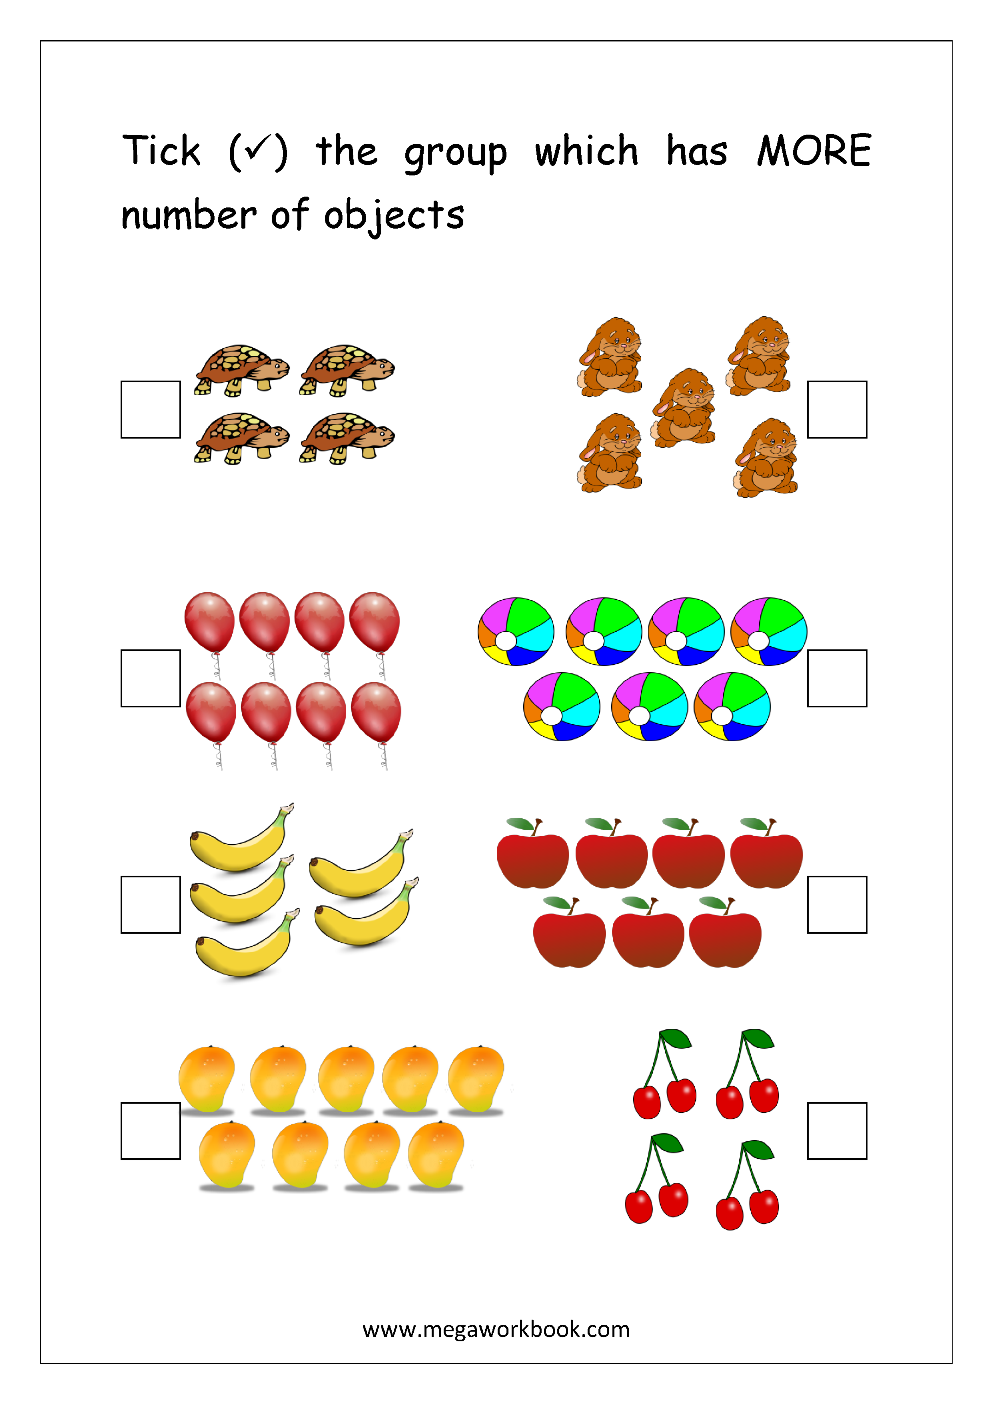 comparing-numbers-1-10-worksheets-kindergarten-kids-are-asked-to